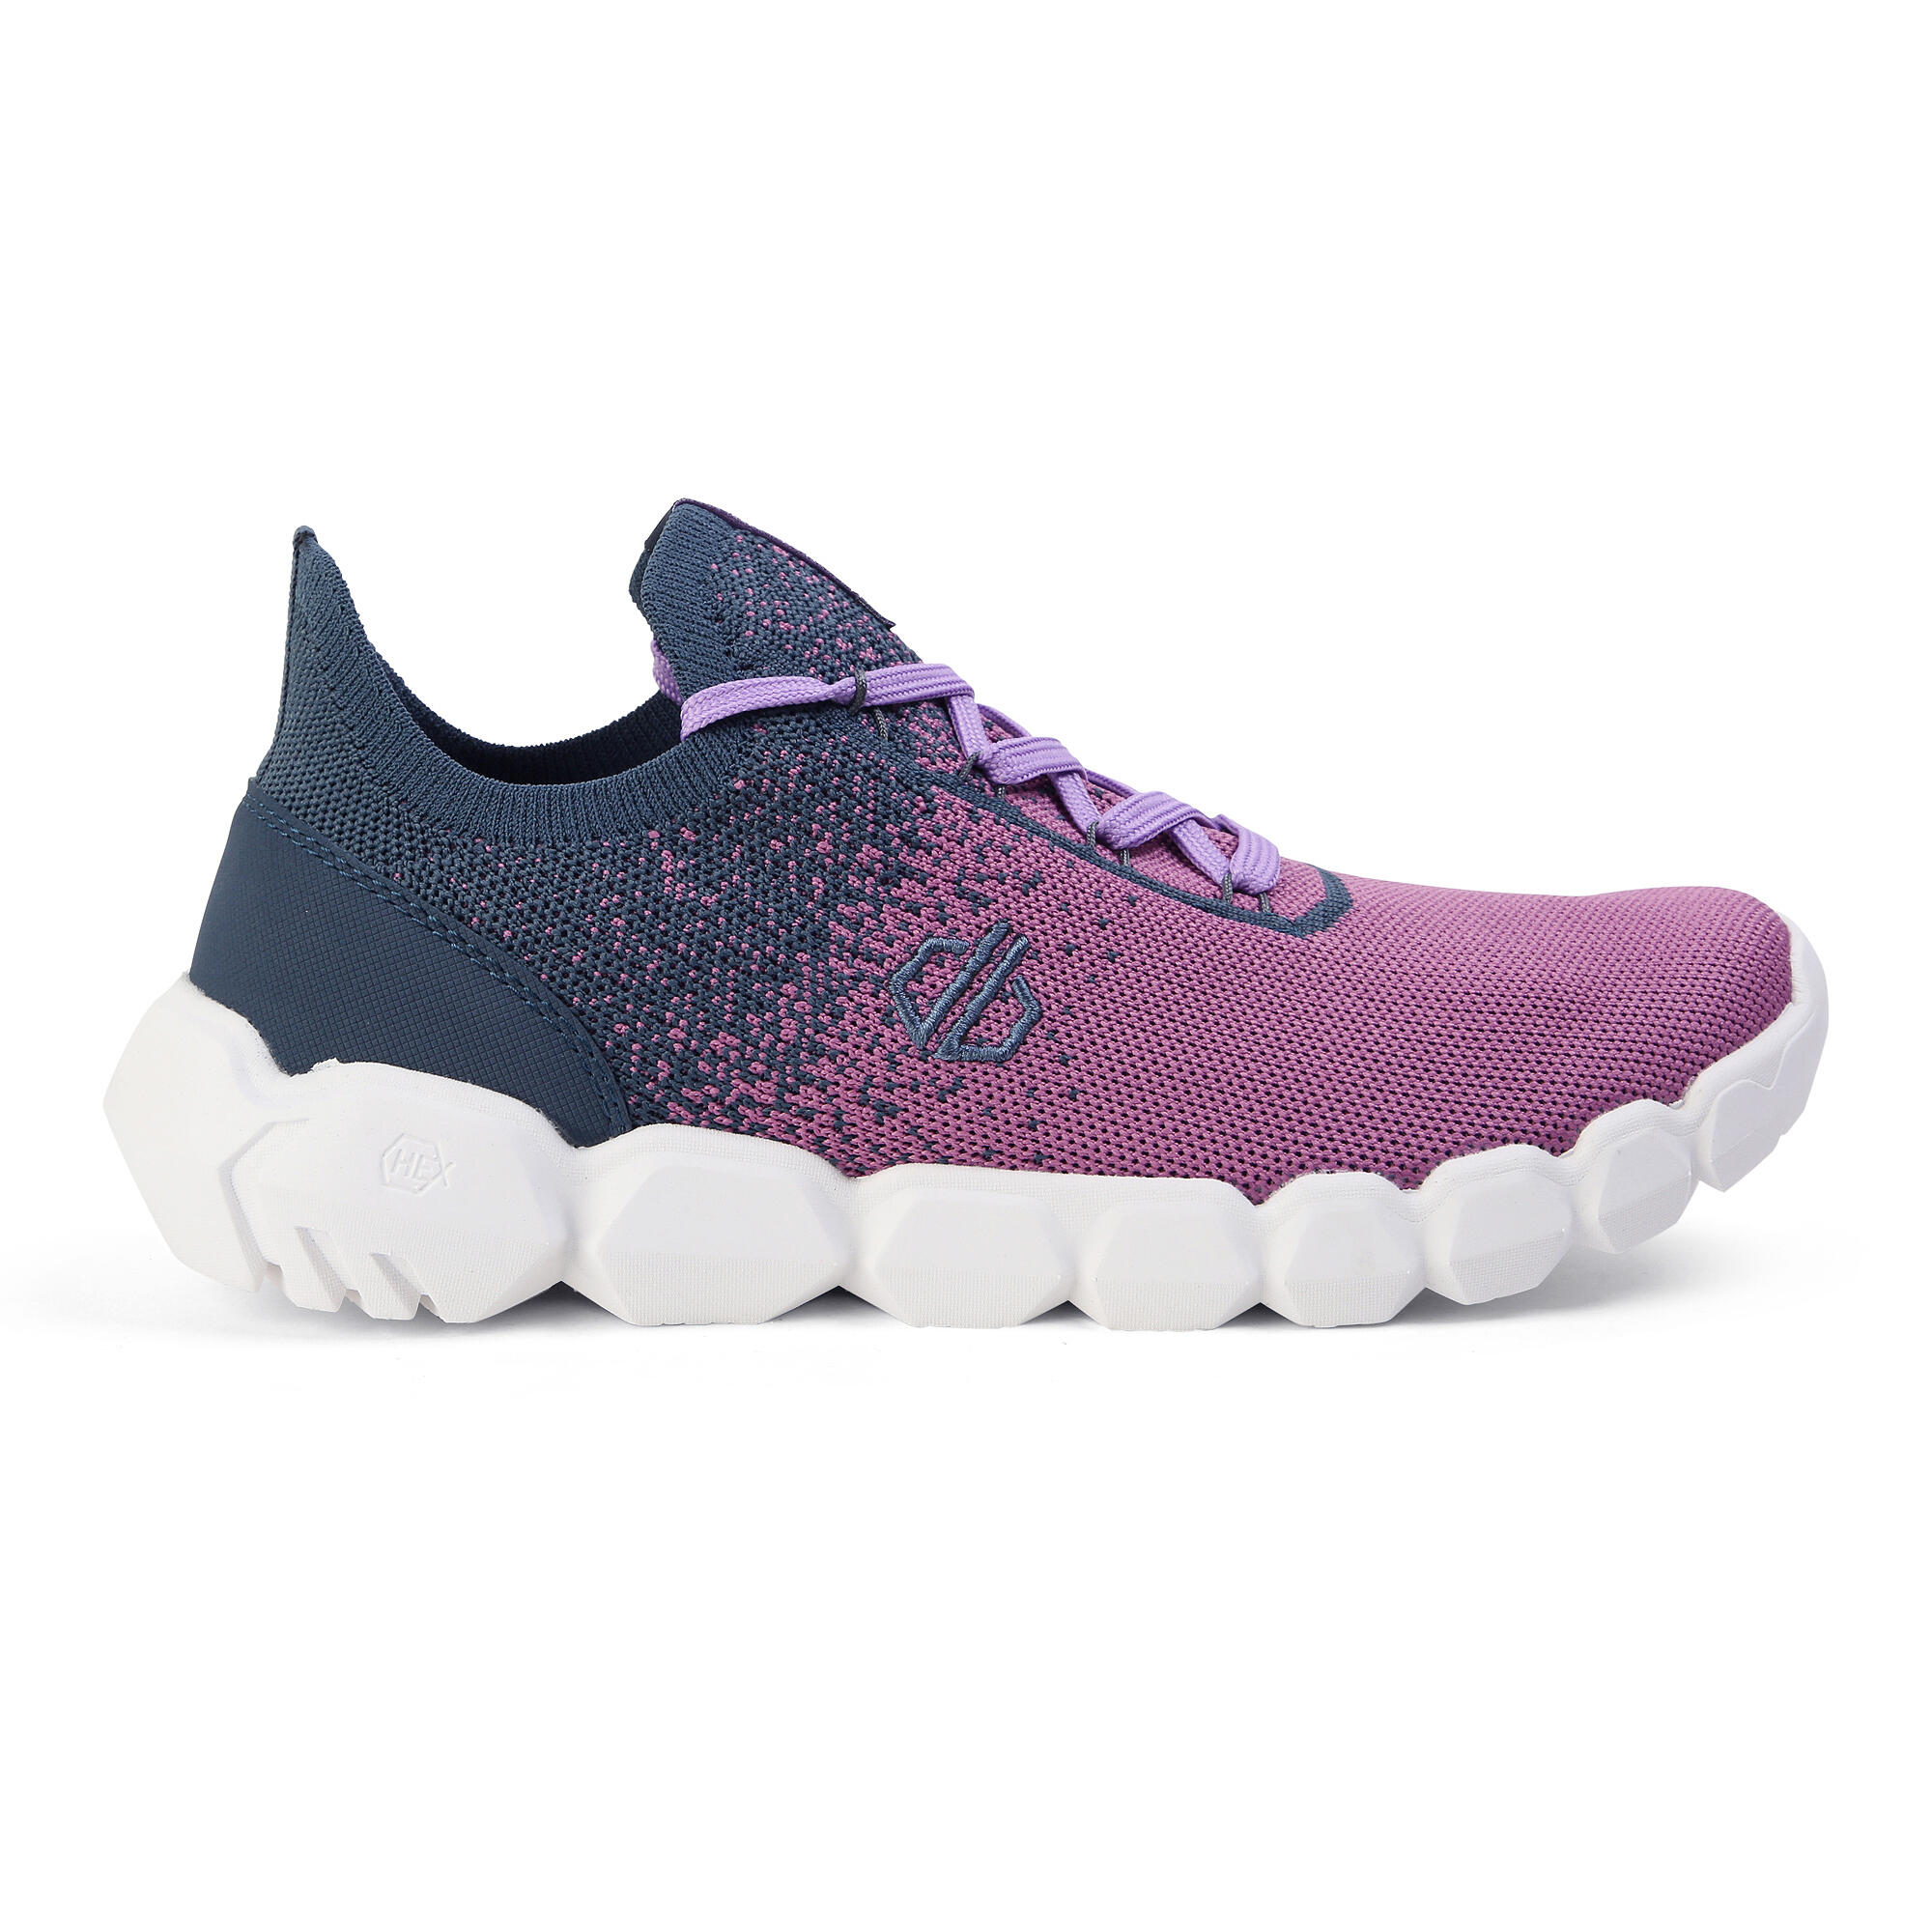 DARE 2B Women's Hex-At Recycled Knit Trainers